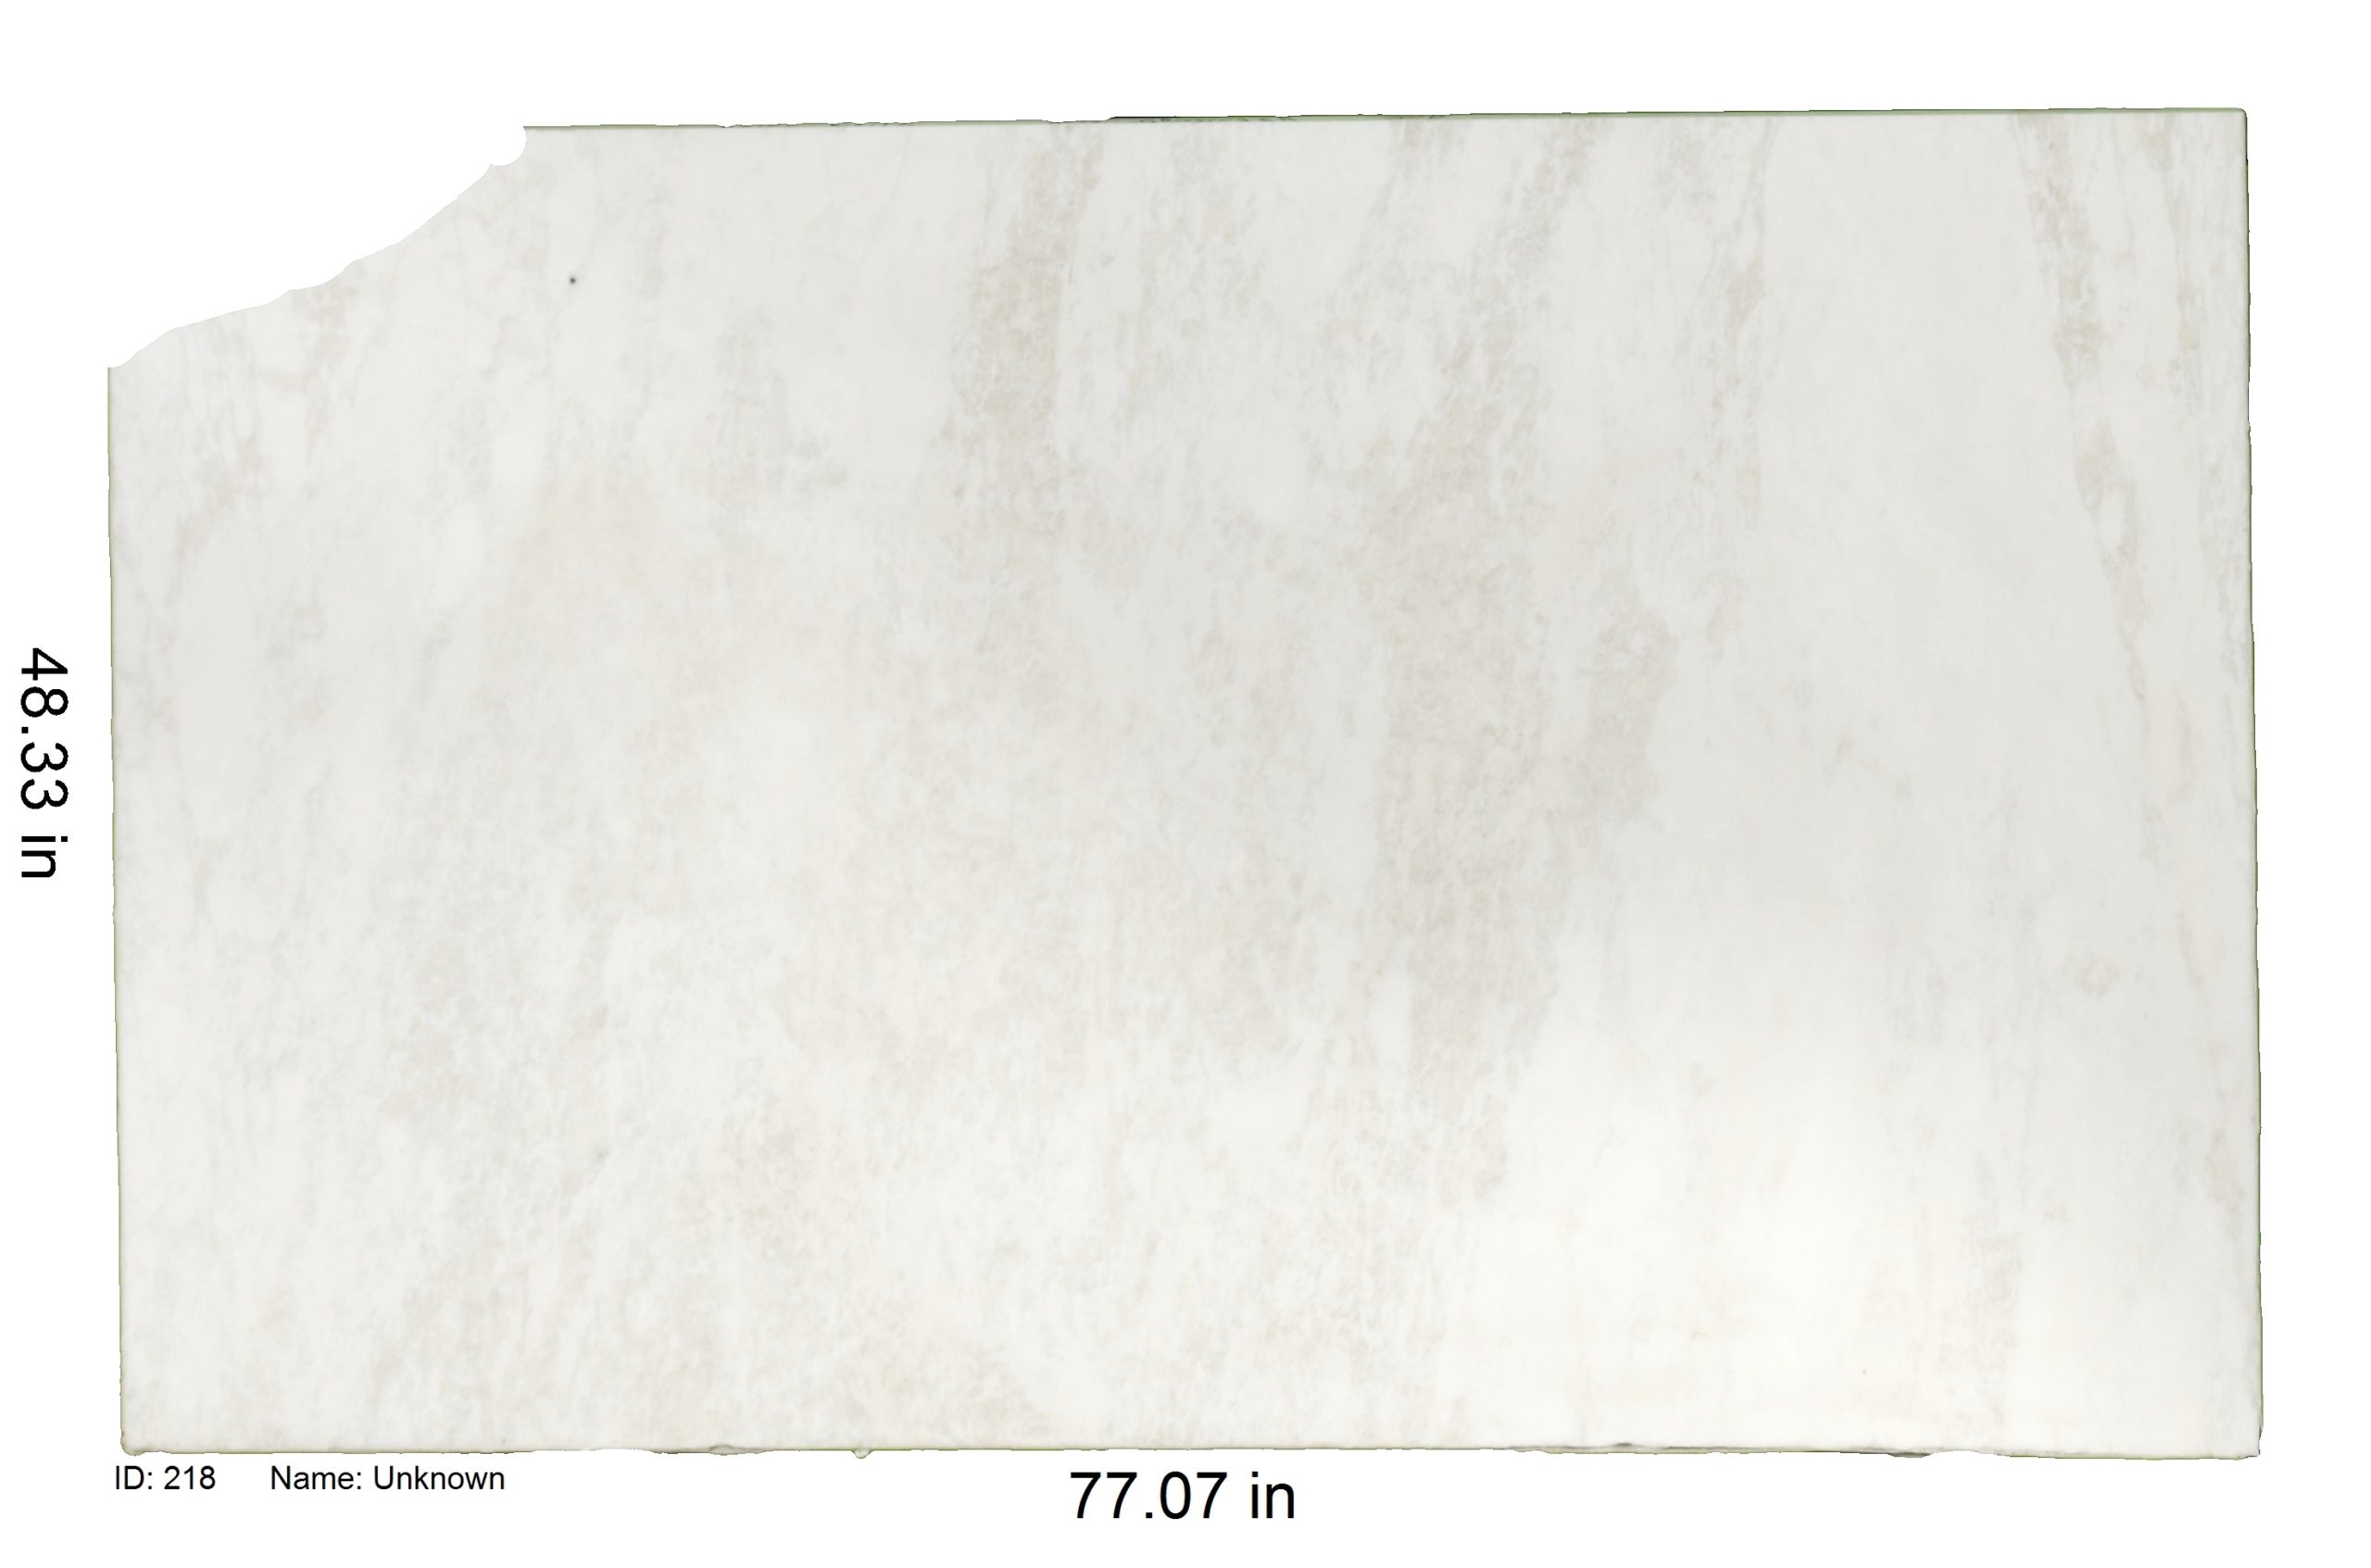 White And Beige Marble<br />
ID: 218<br />
Name: Unknown<br />
Size: 48.33x77.07